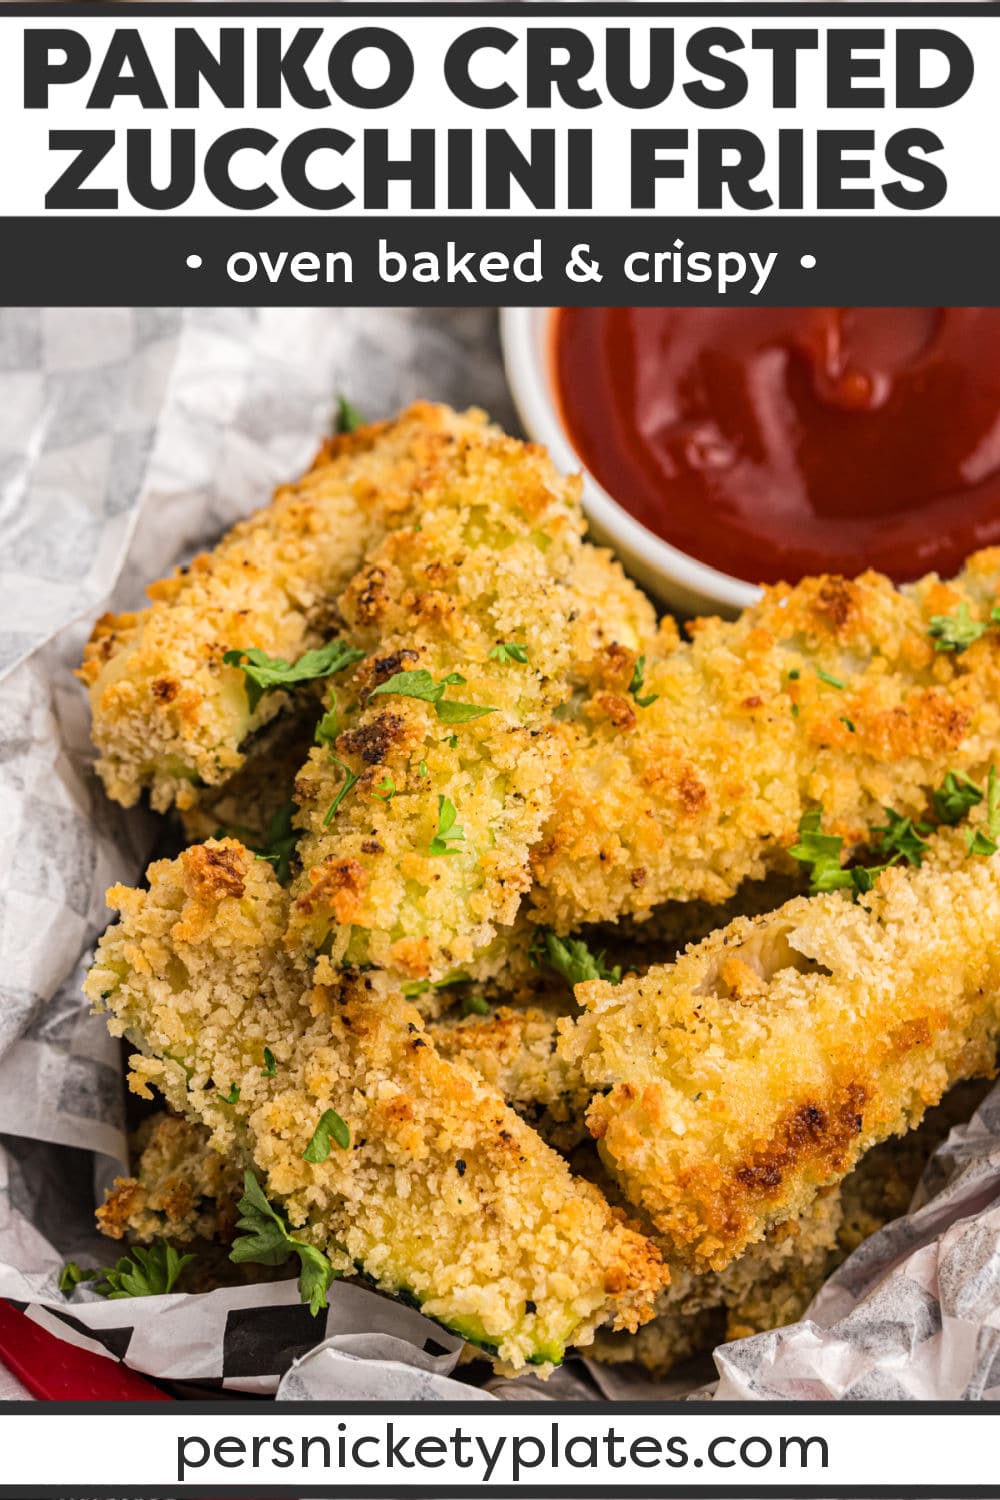 Panko Crusted Zucchini Fries are crispy and seasoned on the outside, tender on the inside, and a great alternative to french fries. Serve with your favorite dipping sauce and even your kids will be asking for seconds! | www.persnicketyplates.com